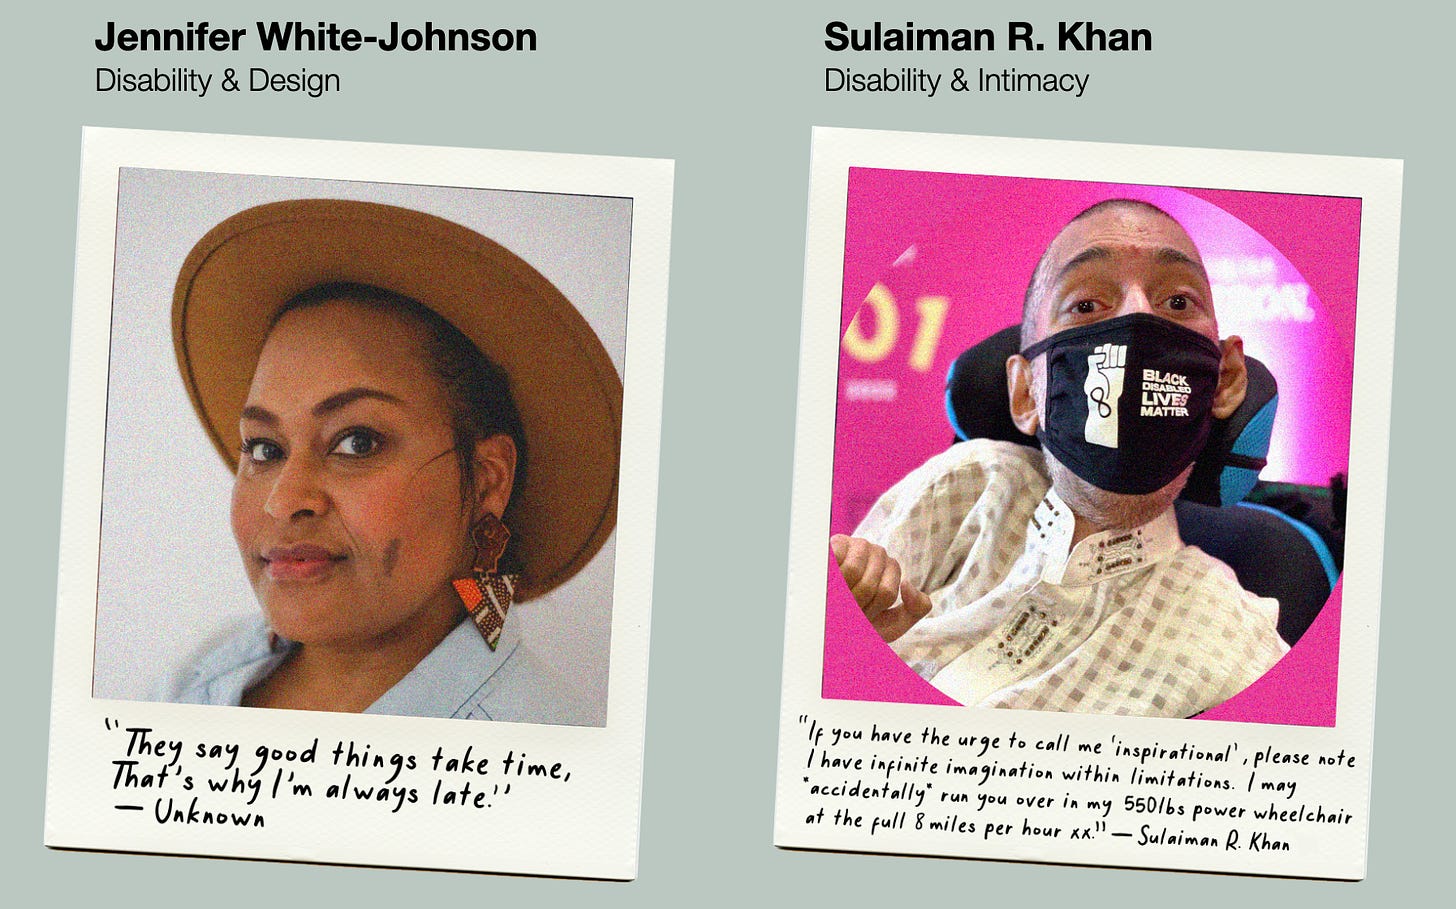 Polaroid pictures of two artists show their headshots and quotes.